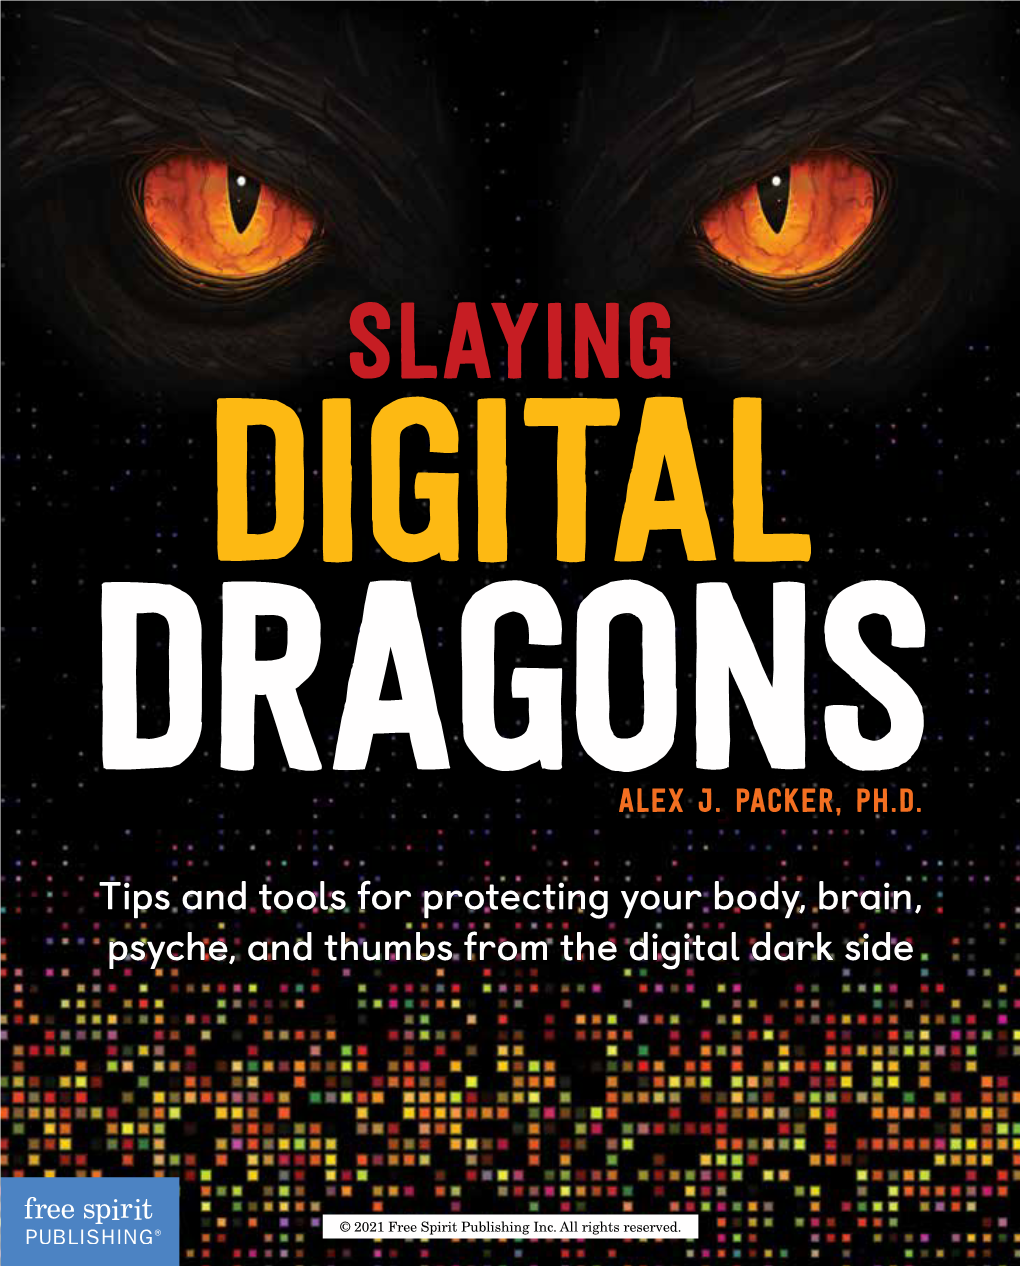 SLAYING DIGITAL DRAGONS Tips and Tools for Protecting Your Body, Brain, Psyche, and Thumbs from the Digital Dark Side ALEX J